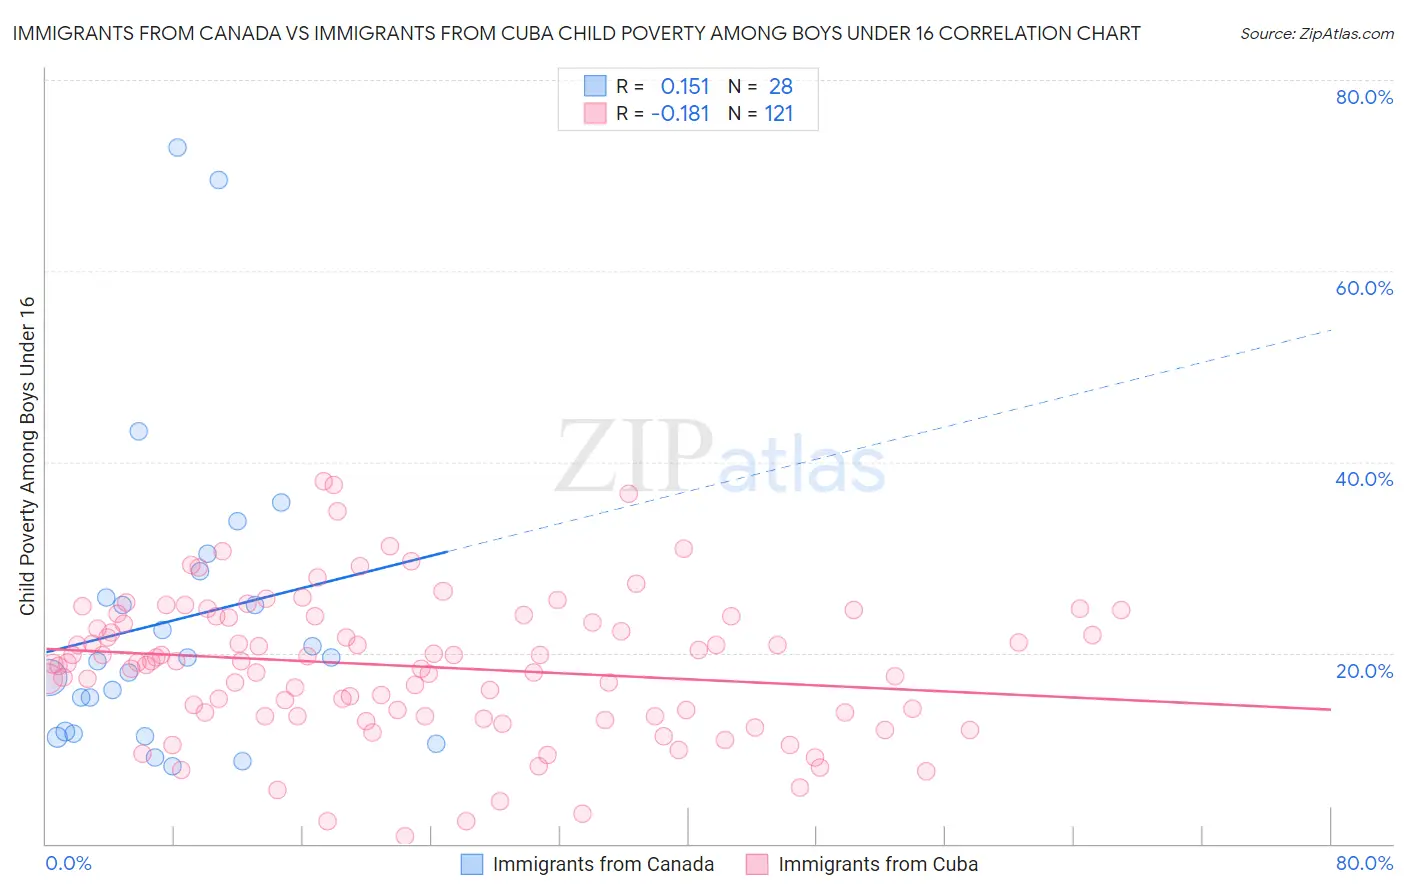 Immigrants from Canada vs Immigrants from Cuba Child Poverty Among Boys Under 16